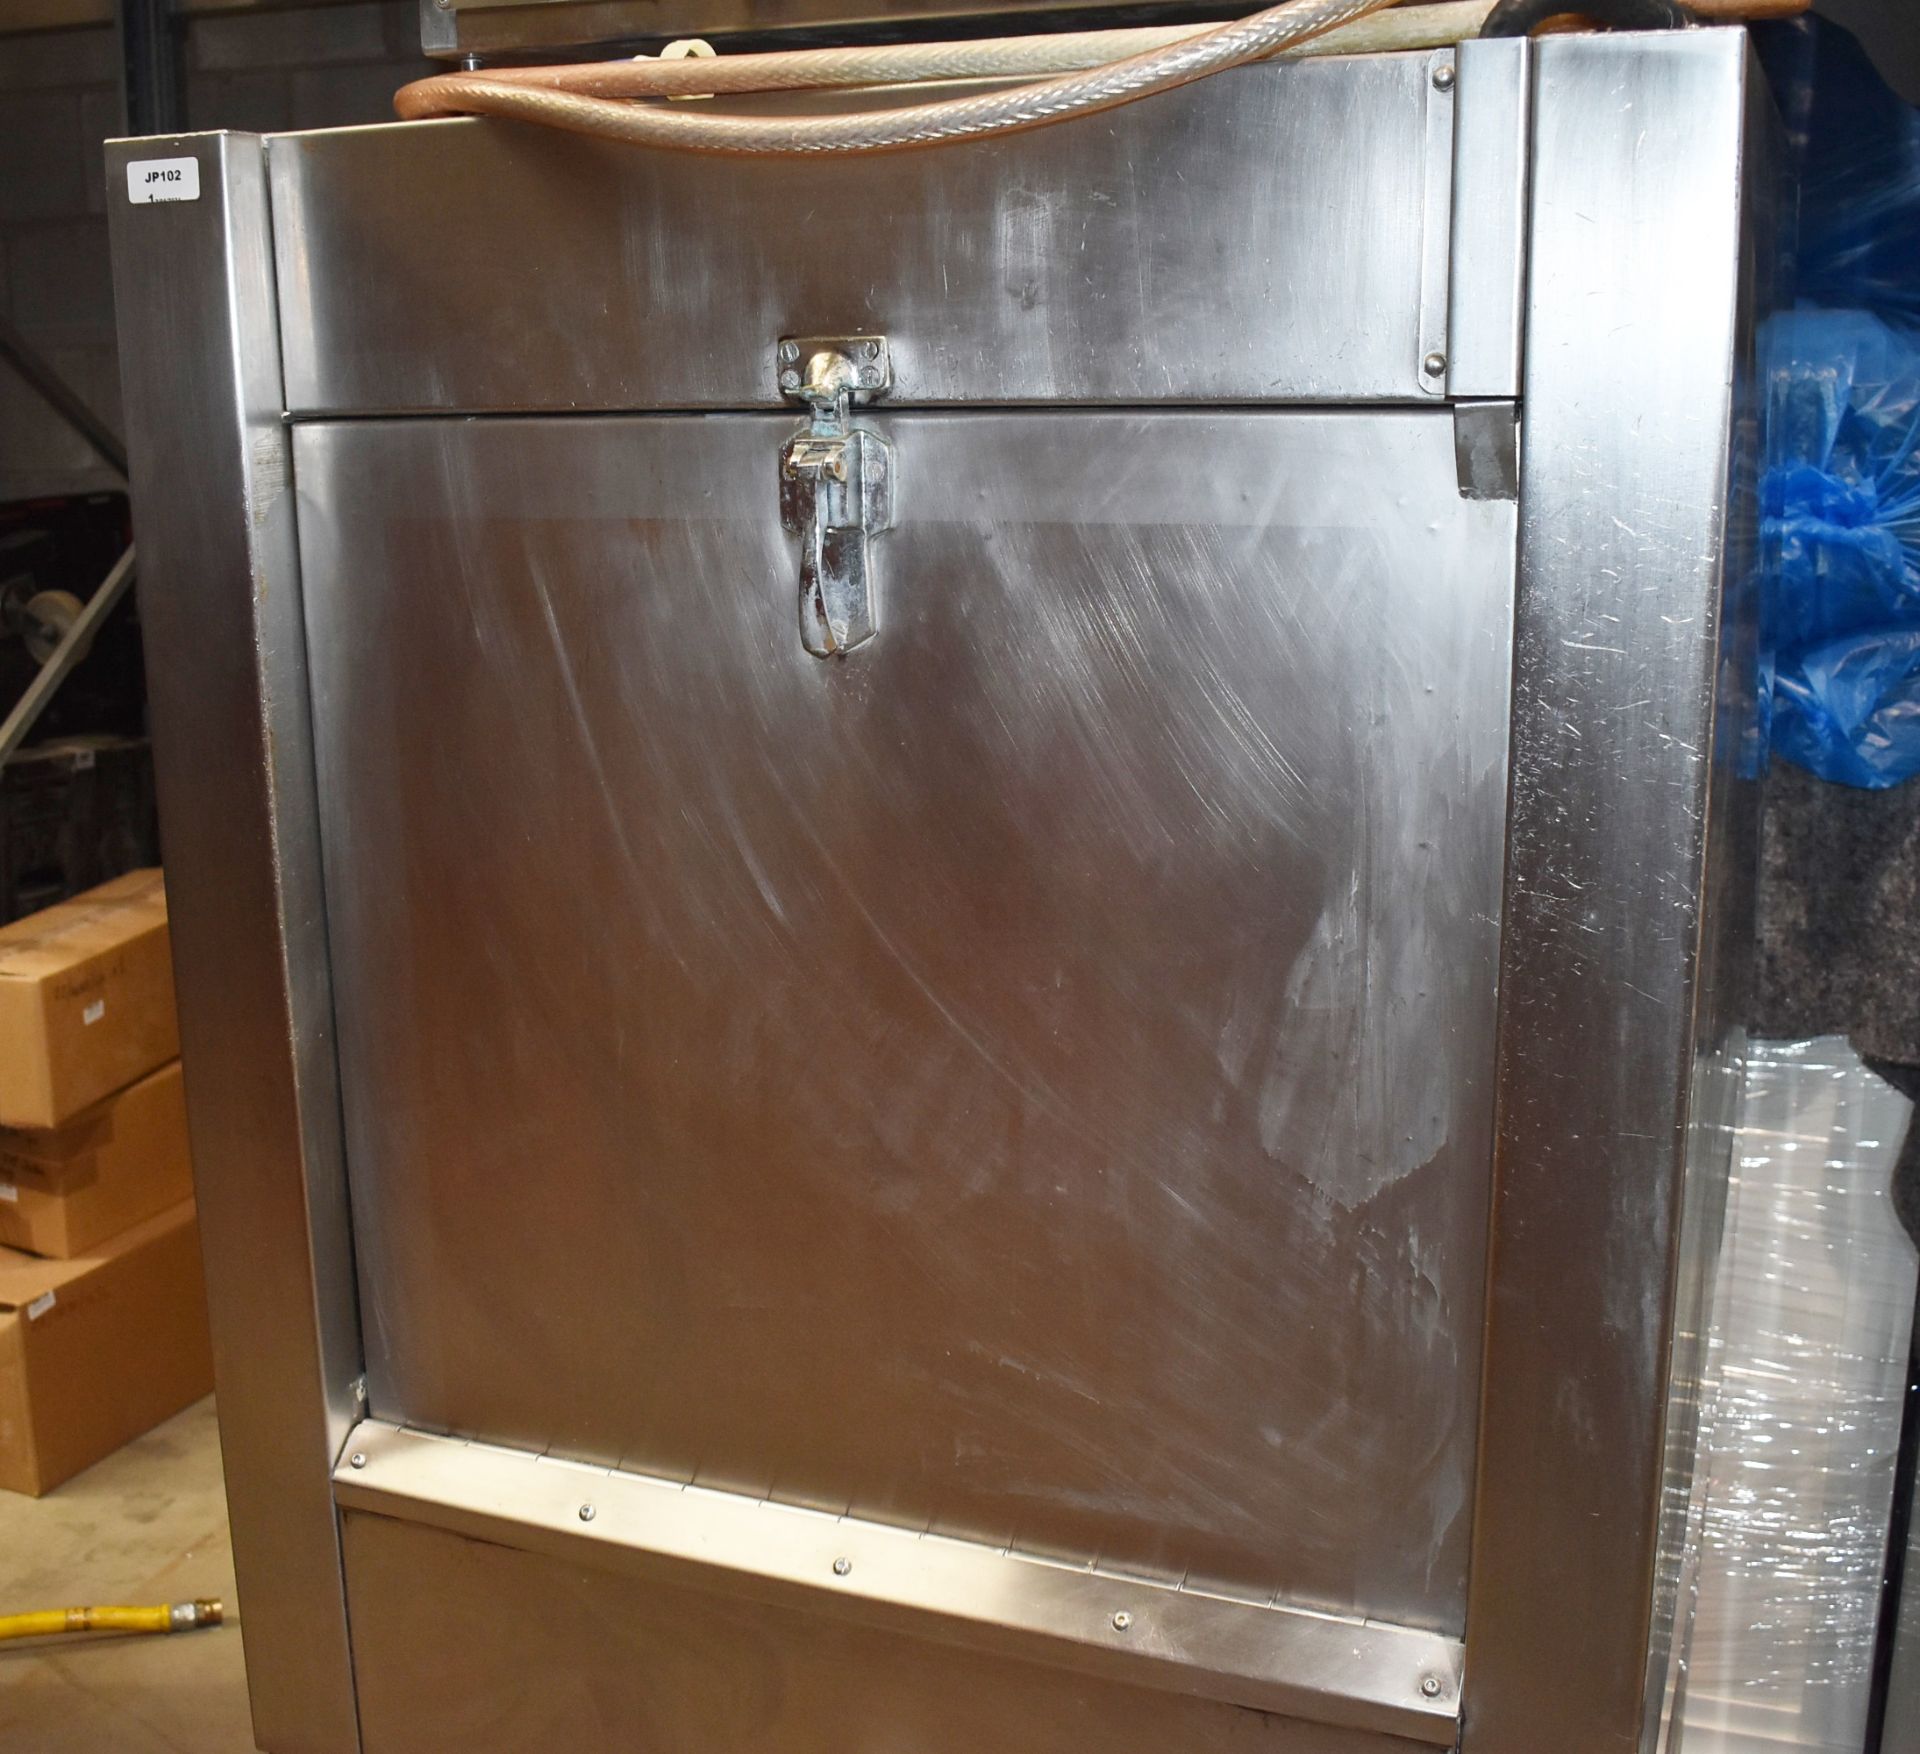 1 x Oliver Douglas Panamatic 500 Industrial Washing Machine For Commercial Kitchen Environments - St - Image 10 of 15